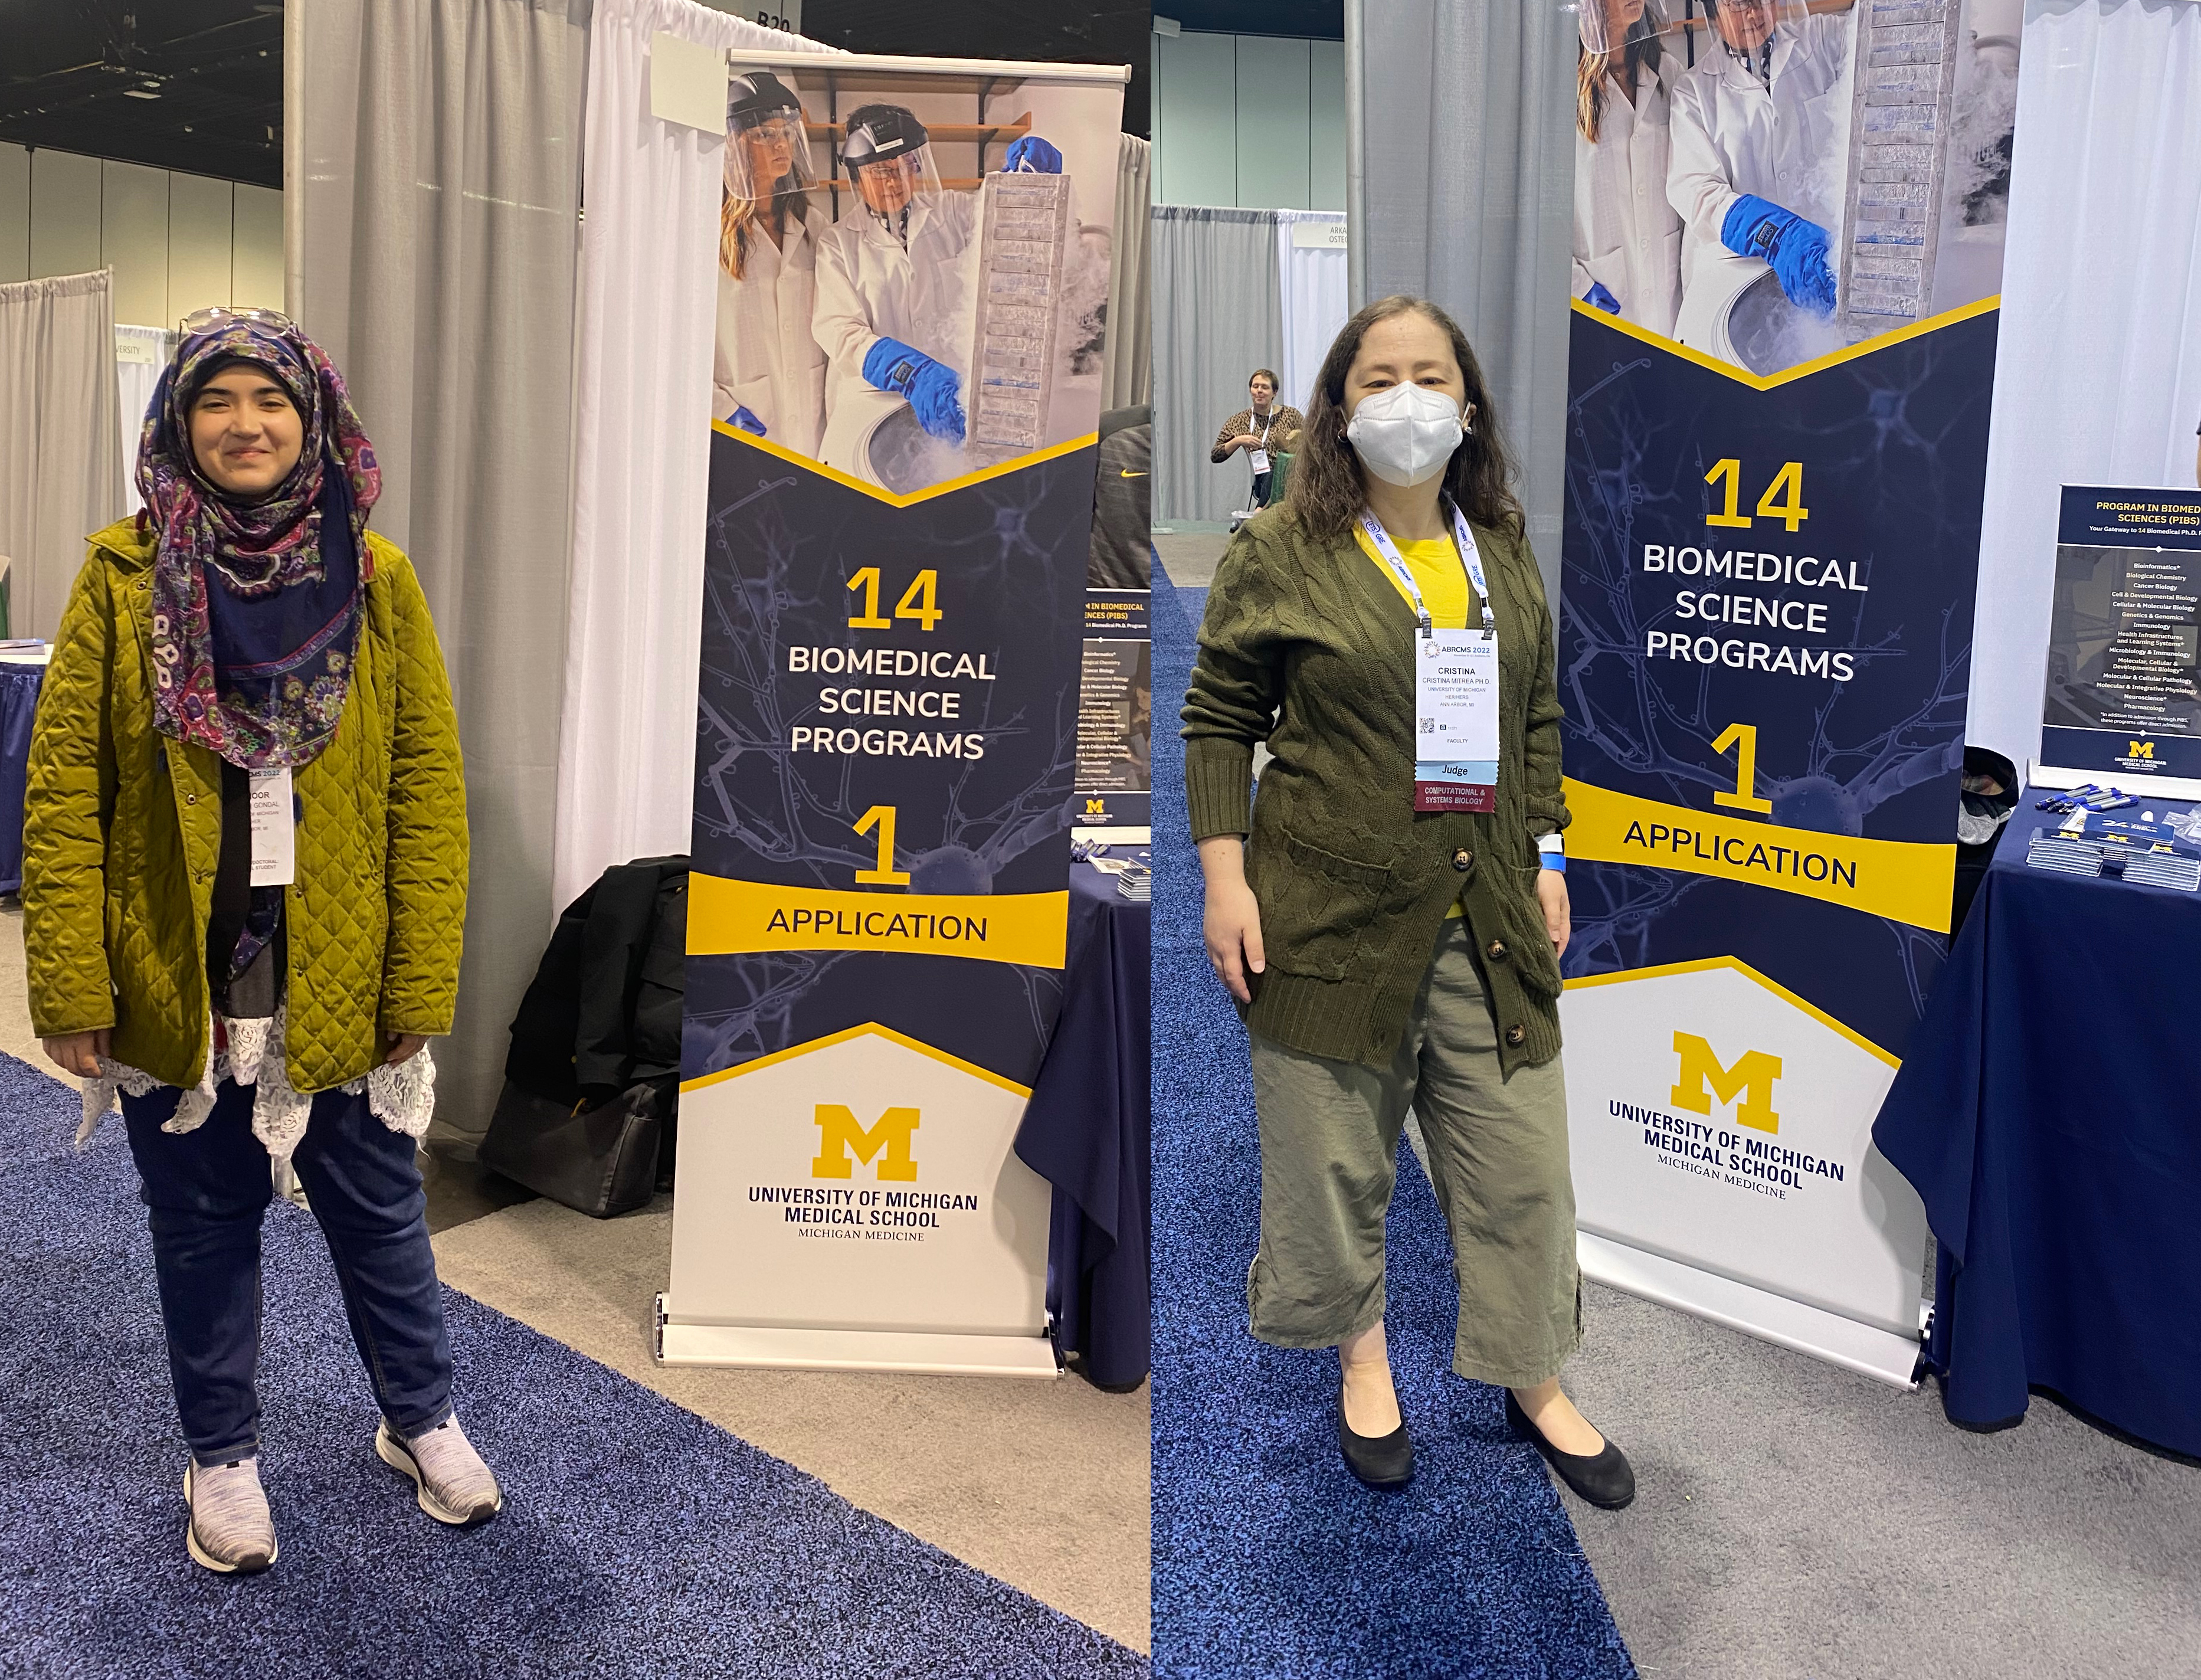  Mahnoor Gondal (left) and Cristina Mitrea (right) at U-M PIBS booth at ABRCMS conference, Anaheim, CA, November 2022 